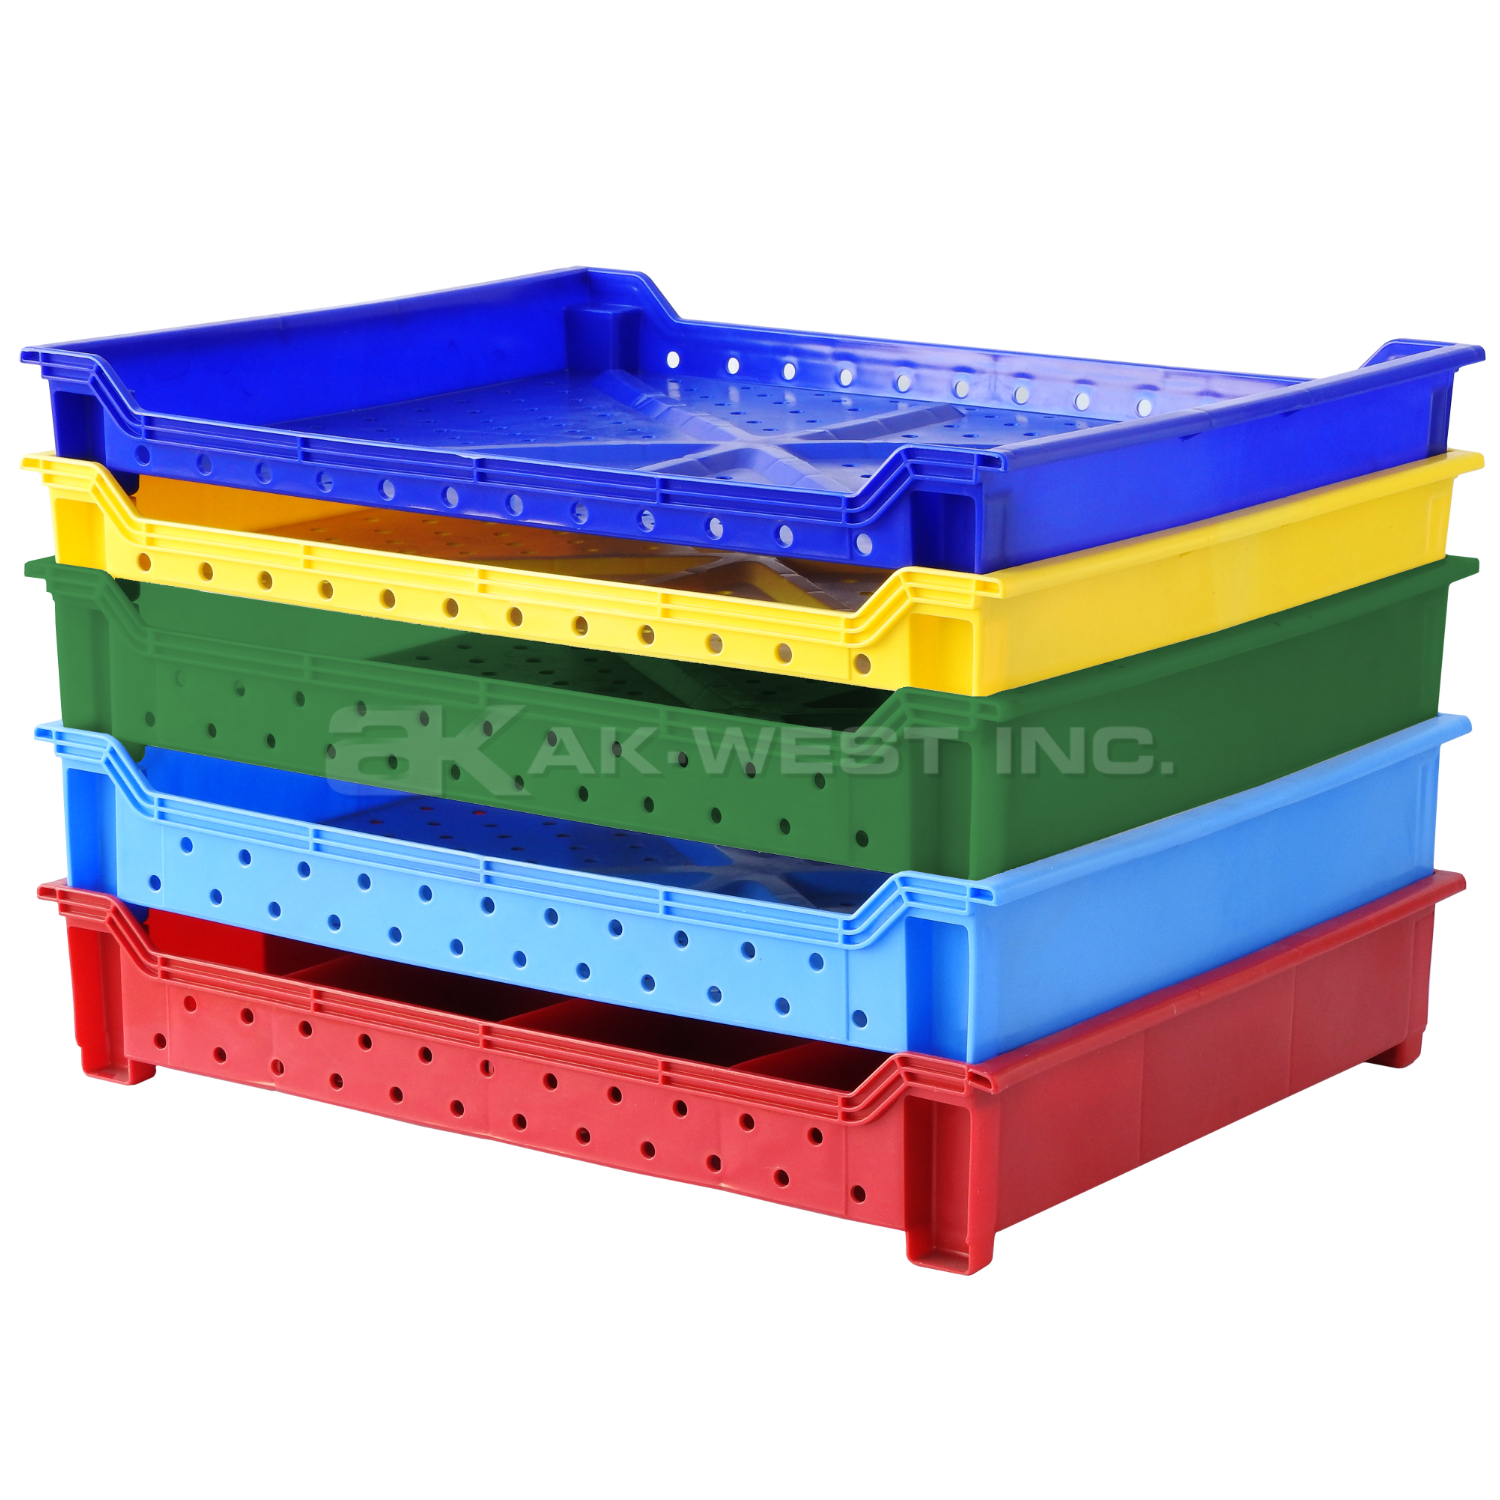 Lt. Blue, 24"L x 18"W x 4"H Stackable Tray w/ Vented Sides and Base